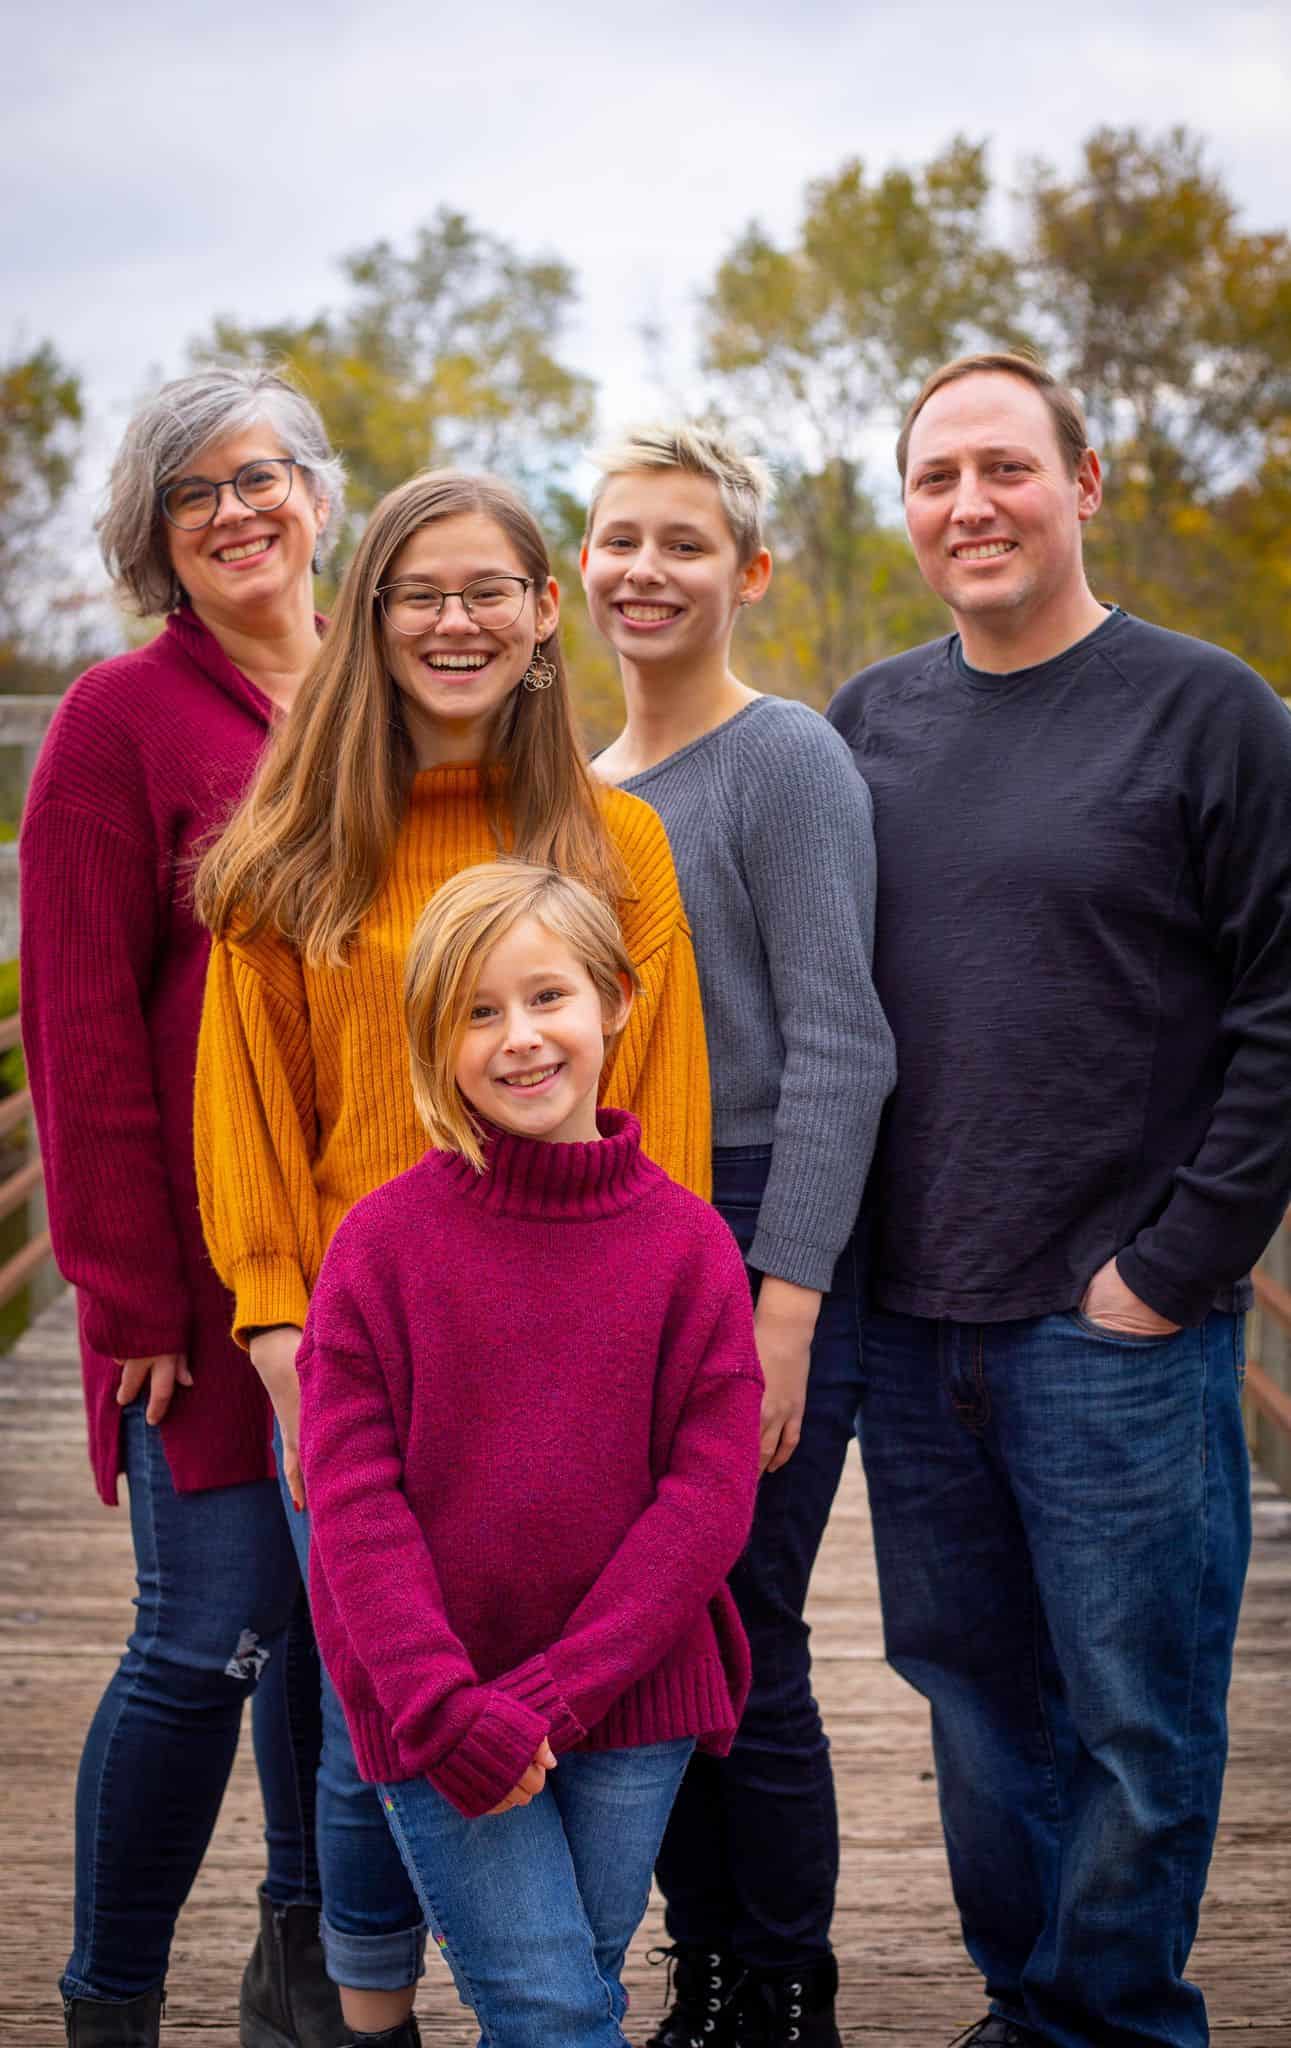 Seven Tips for Capturing the Best Fall Family Photos